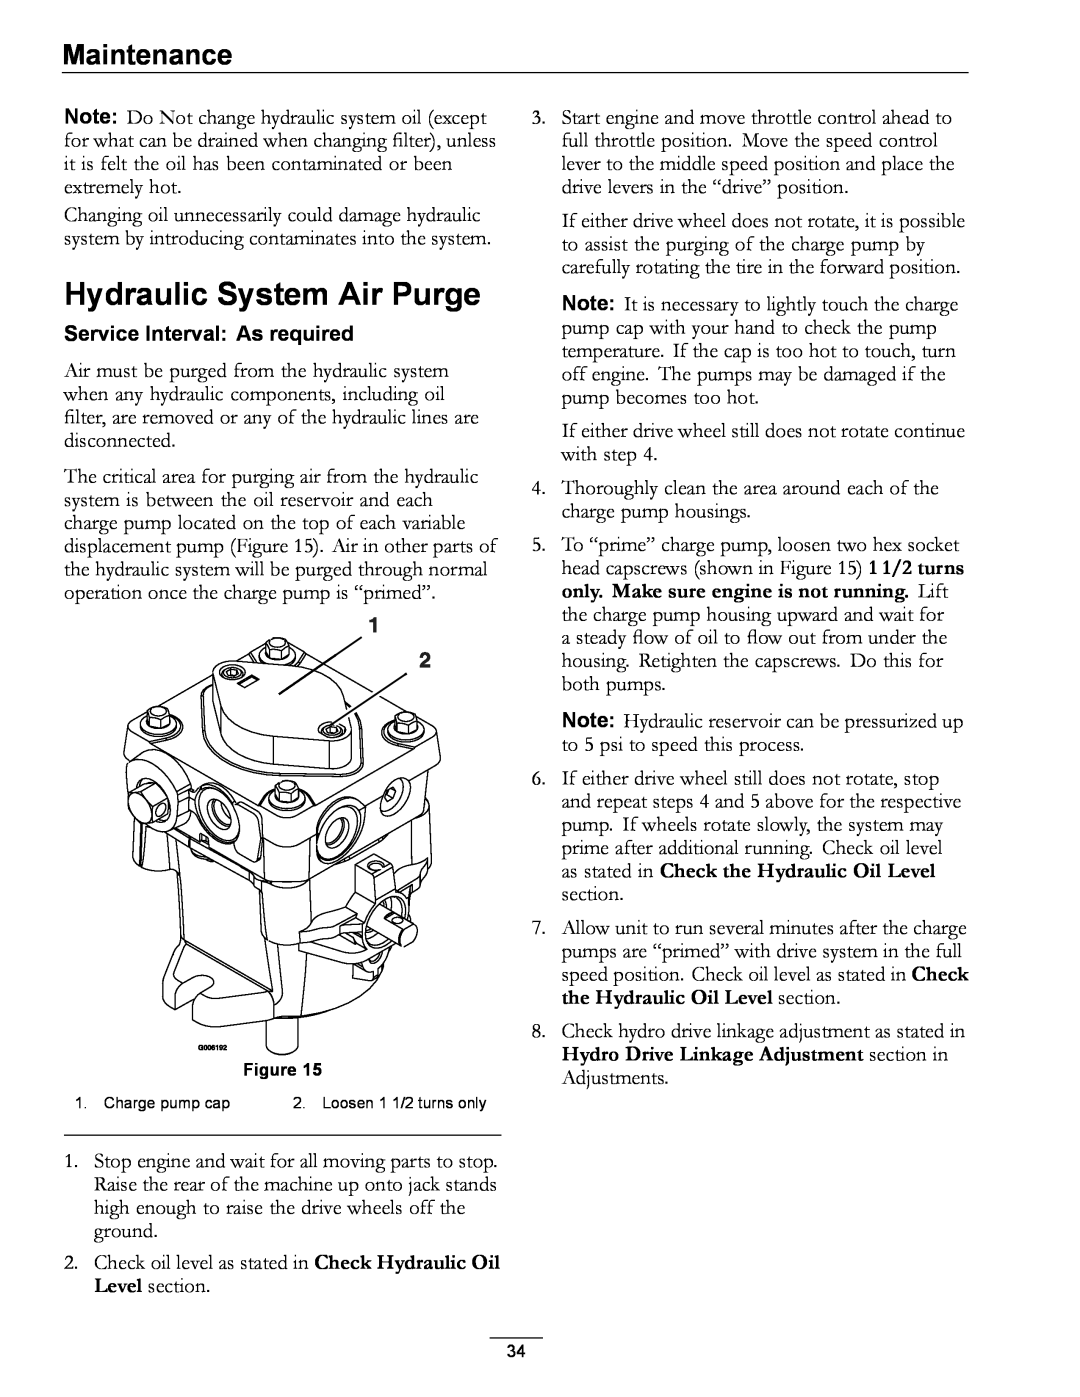 Exmark 312 Hydraulic System Air Purge, Maintenance, Service Interval As required, Charge pump cap, Loosen 1 1/2 turns only 